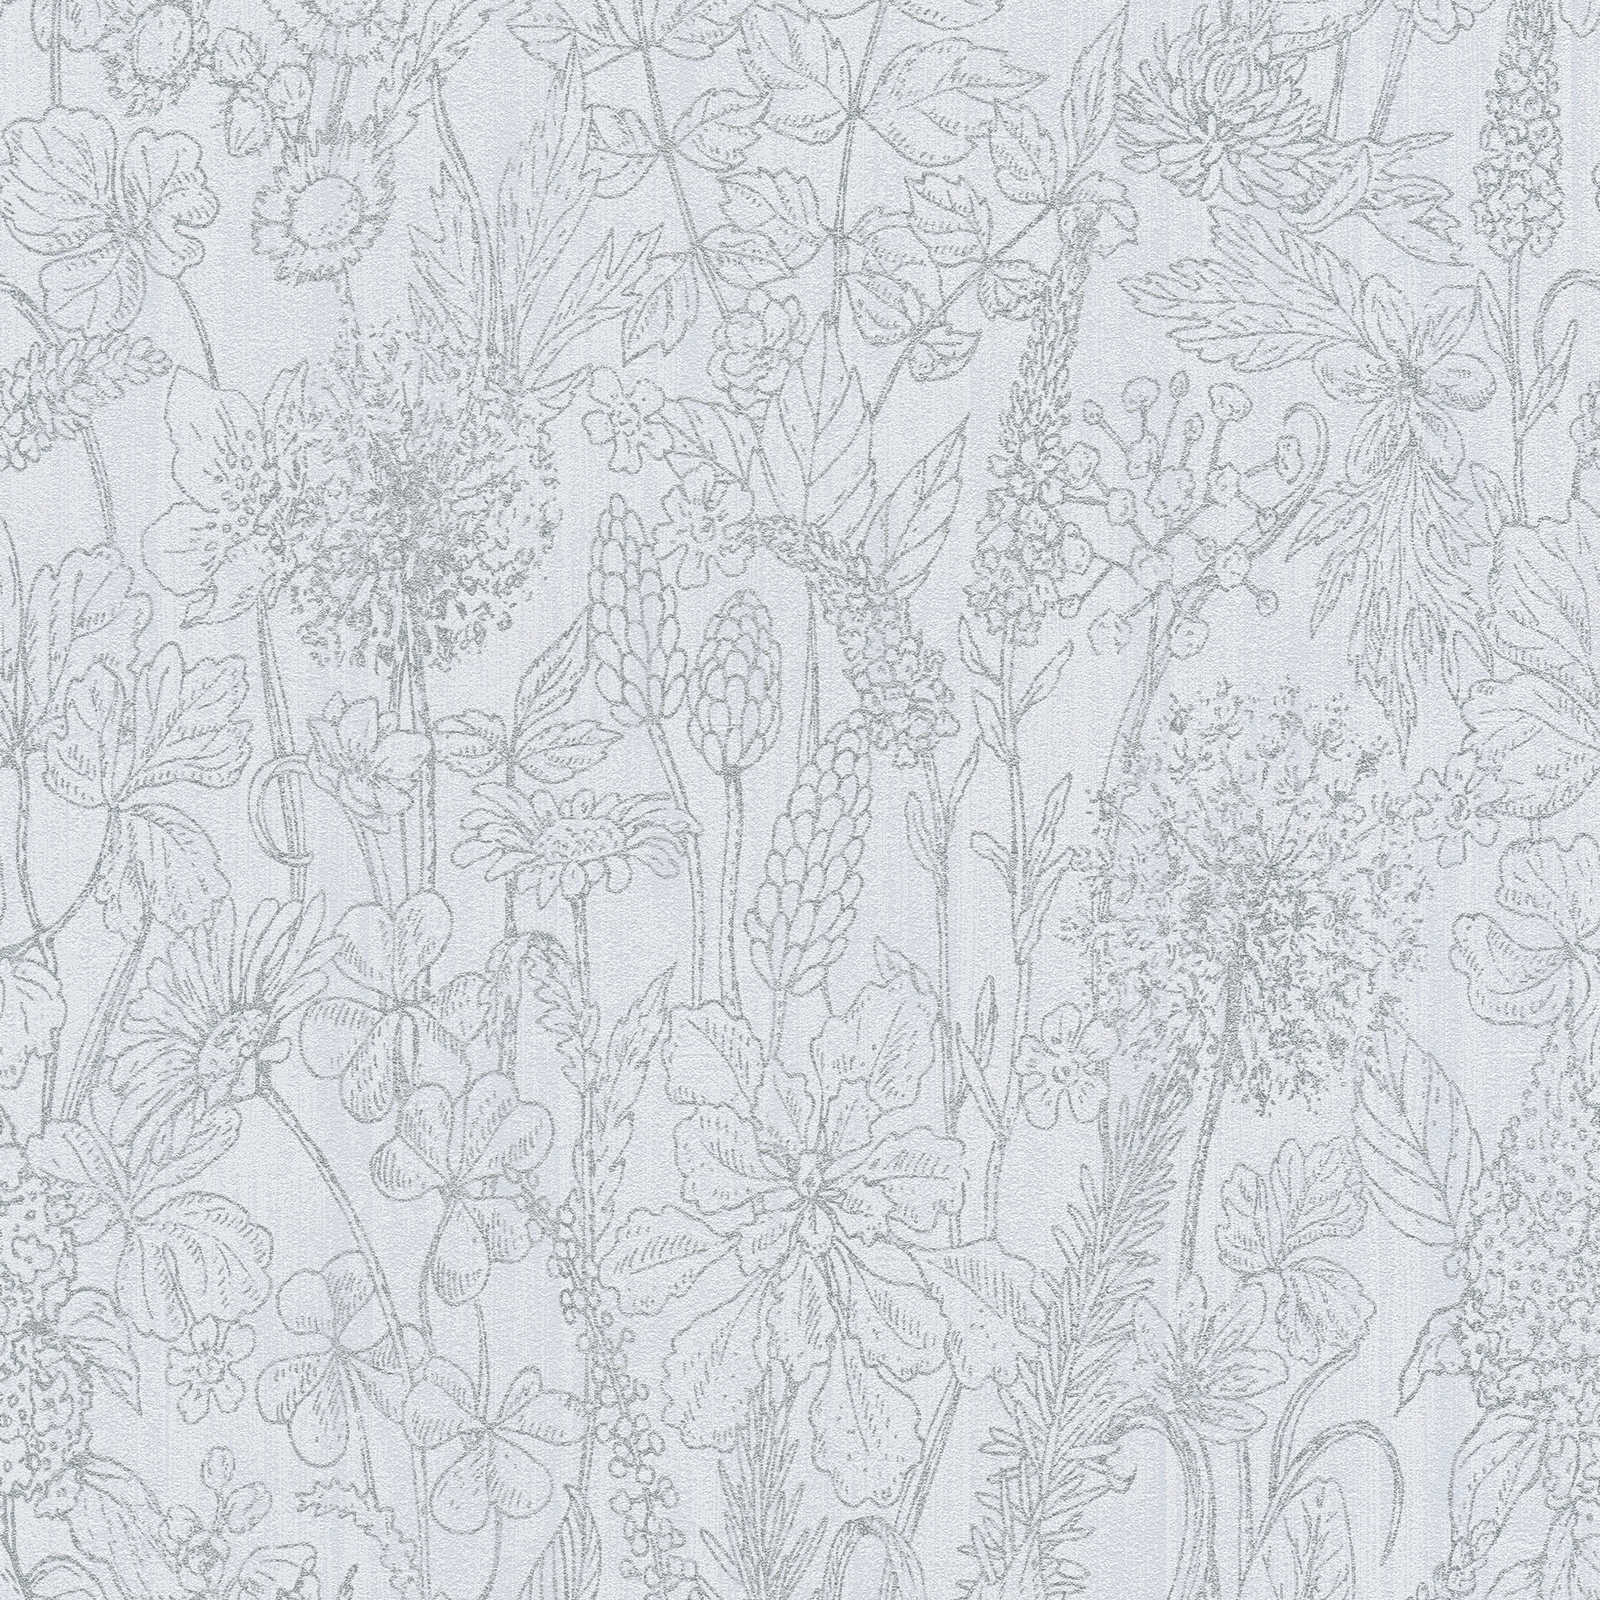 Flowers wallpaper botanical style with linen look - grey
